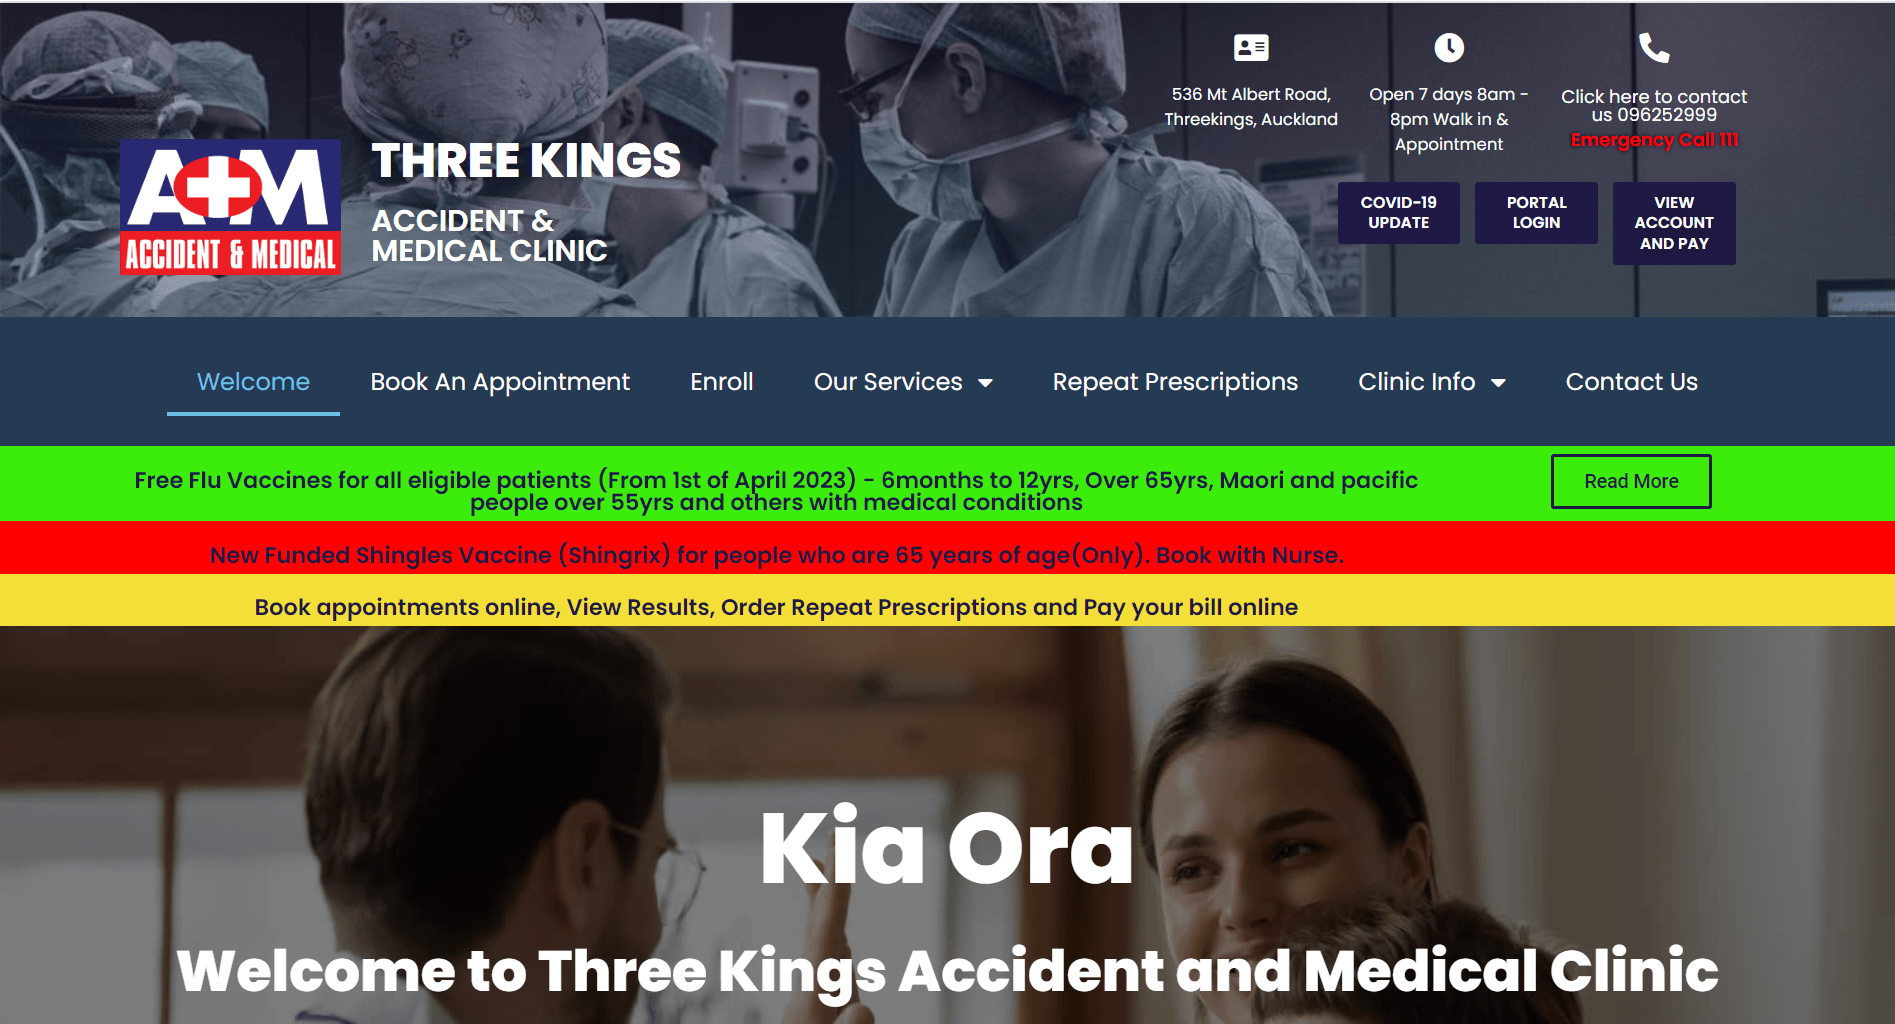 Three Kings Accident & Medical Clinic Homepage. Website designed and developed by Digital Refinery.